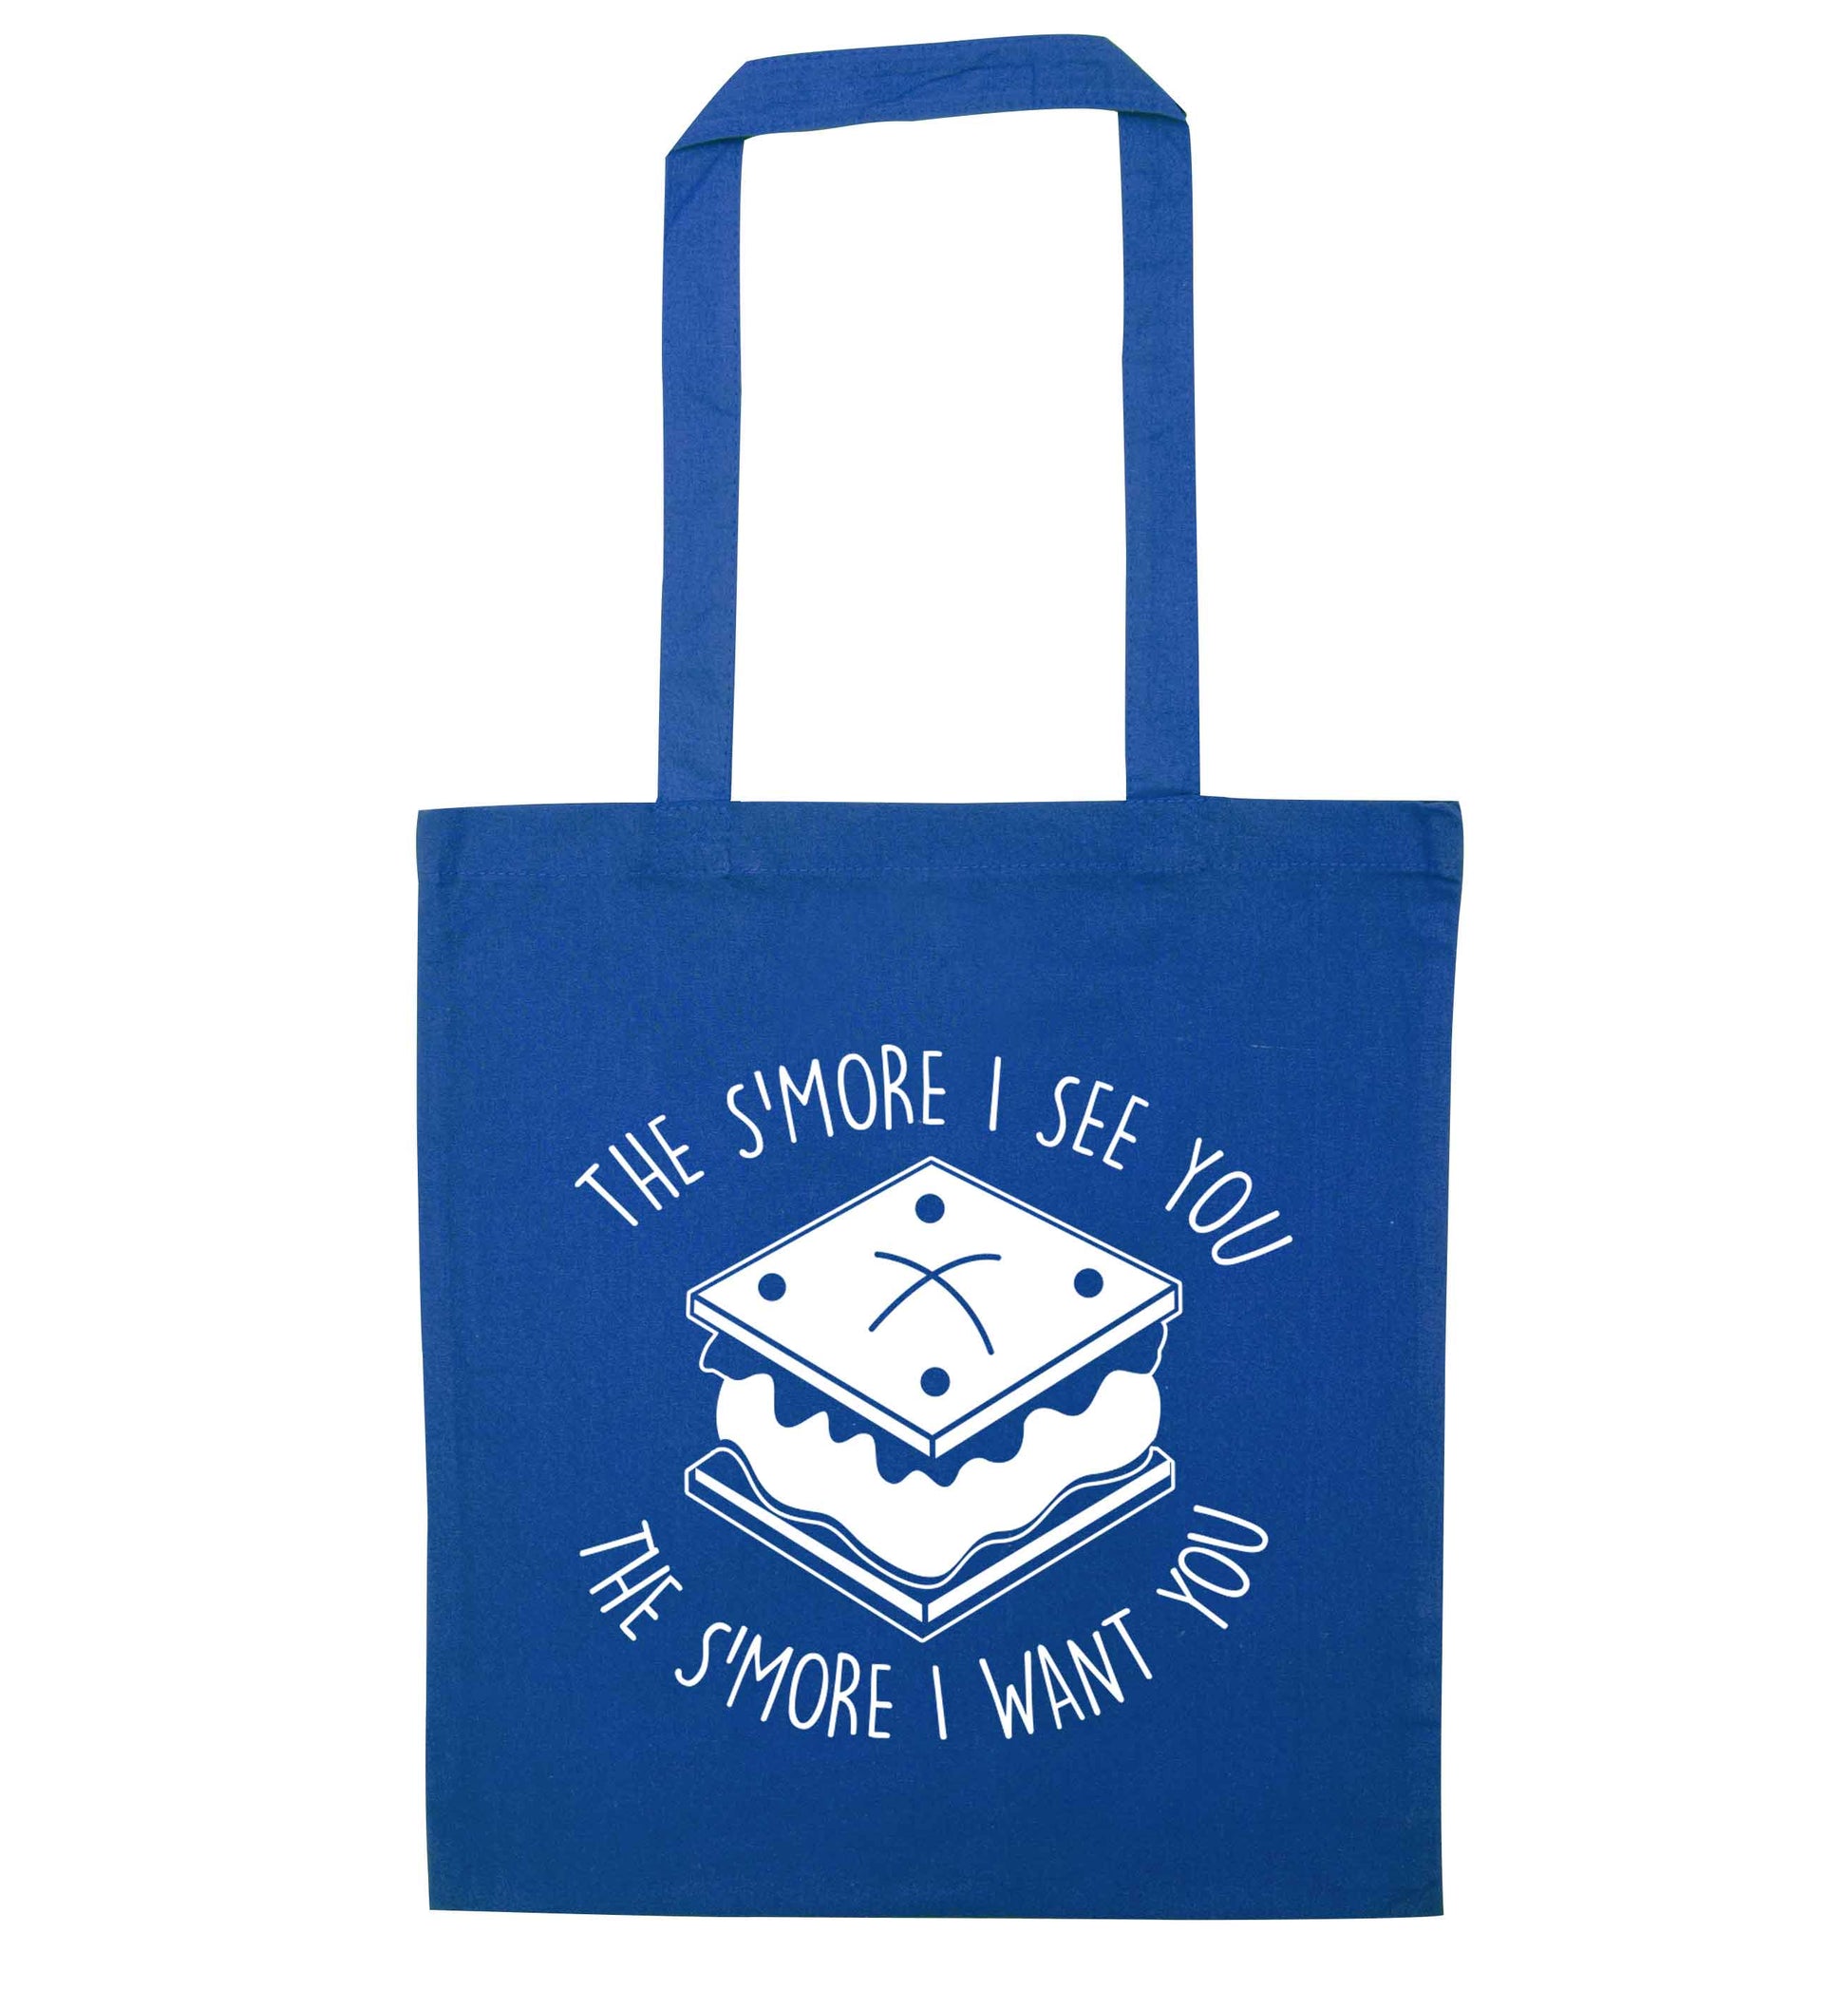 The s'more I see you the s'more I want you blue tote bag